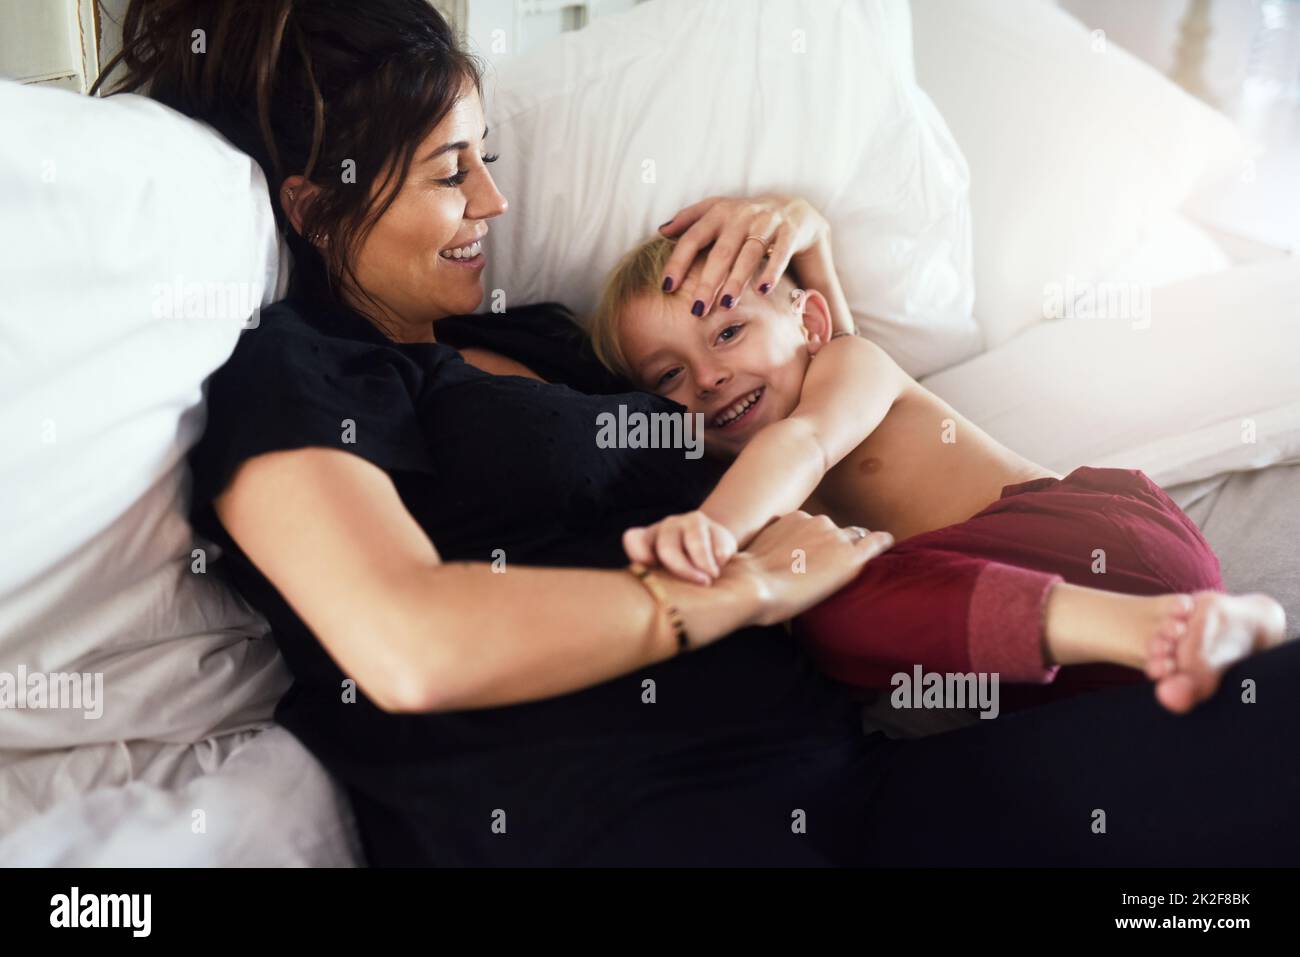 My precious little darling. Shot of a cheerful little boy and his mother hanging out on the bed at home while relaxing during the day. Stock Photo